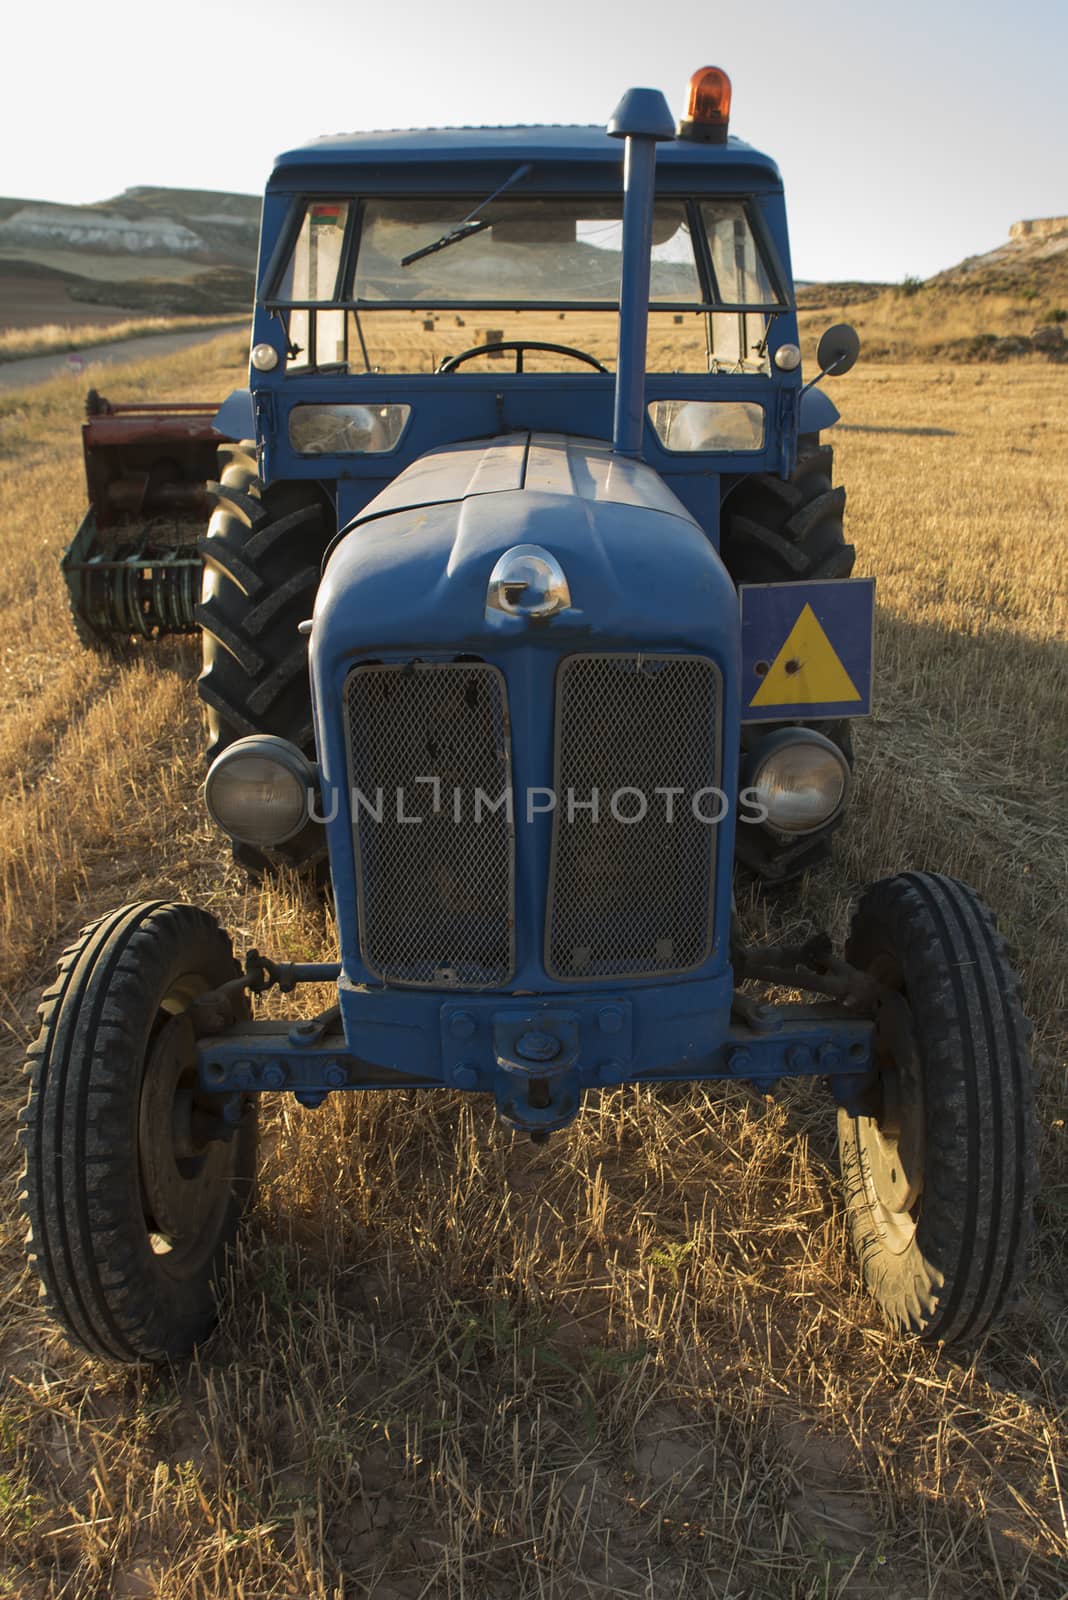 Old tractor in the field